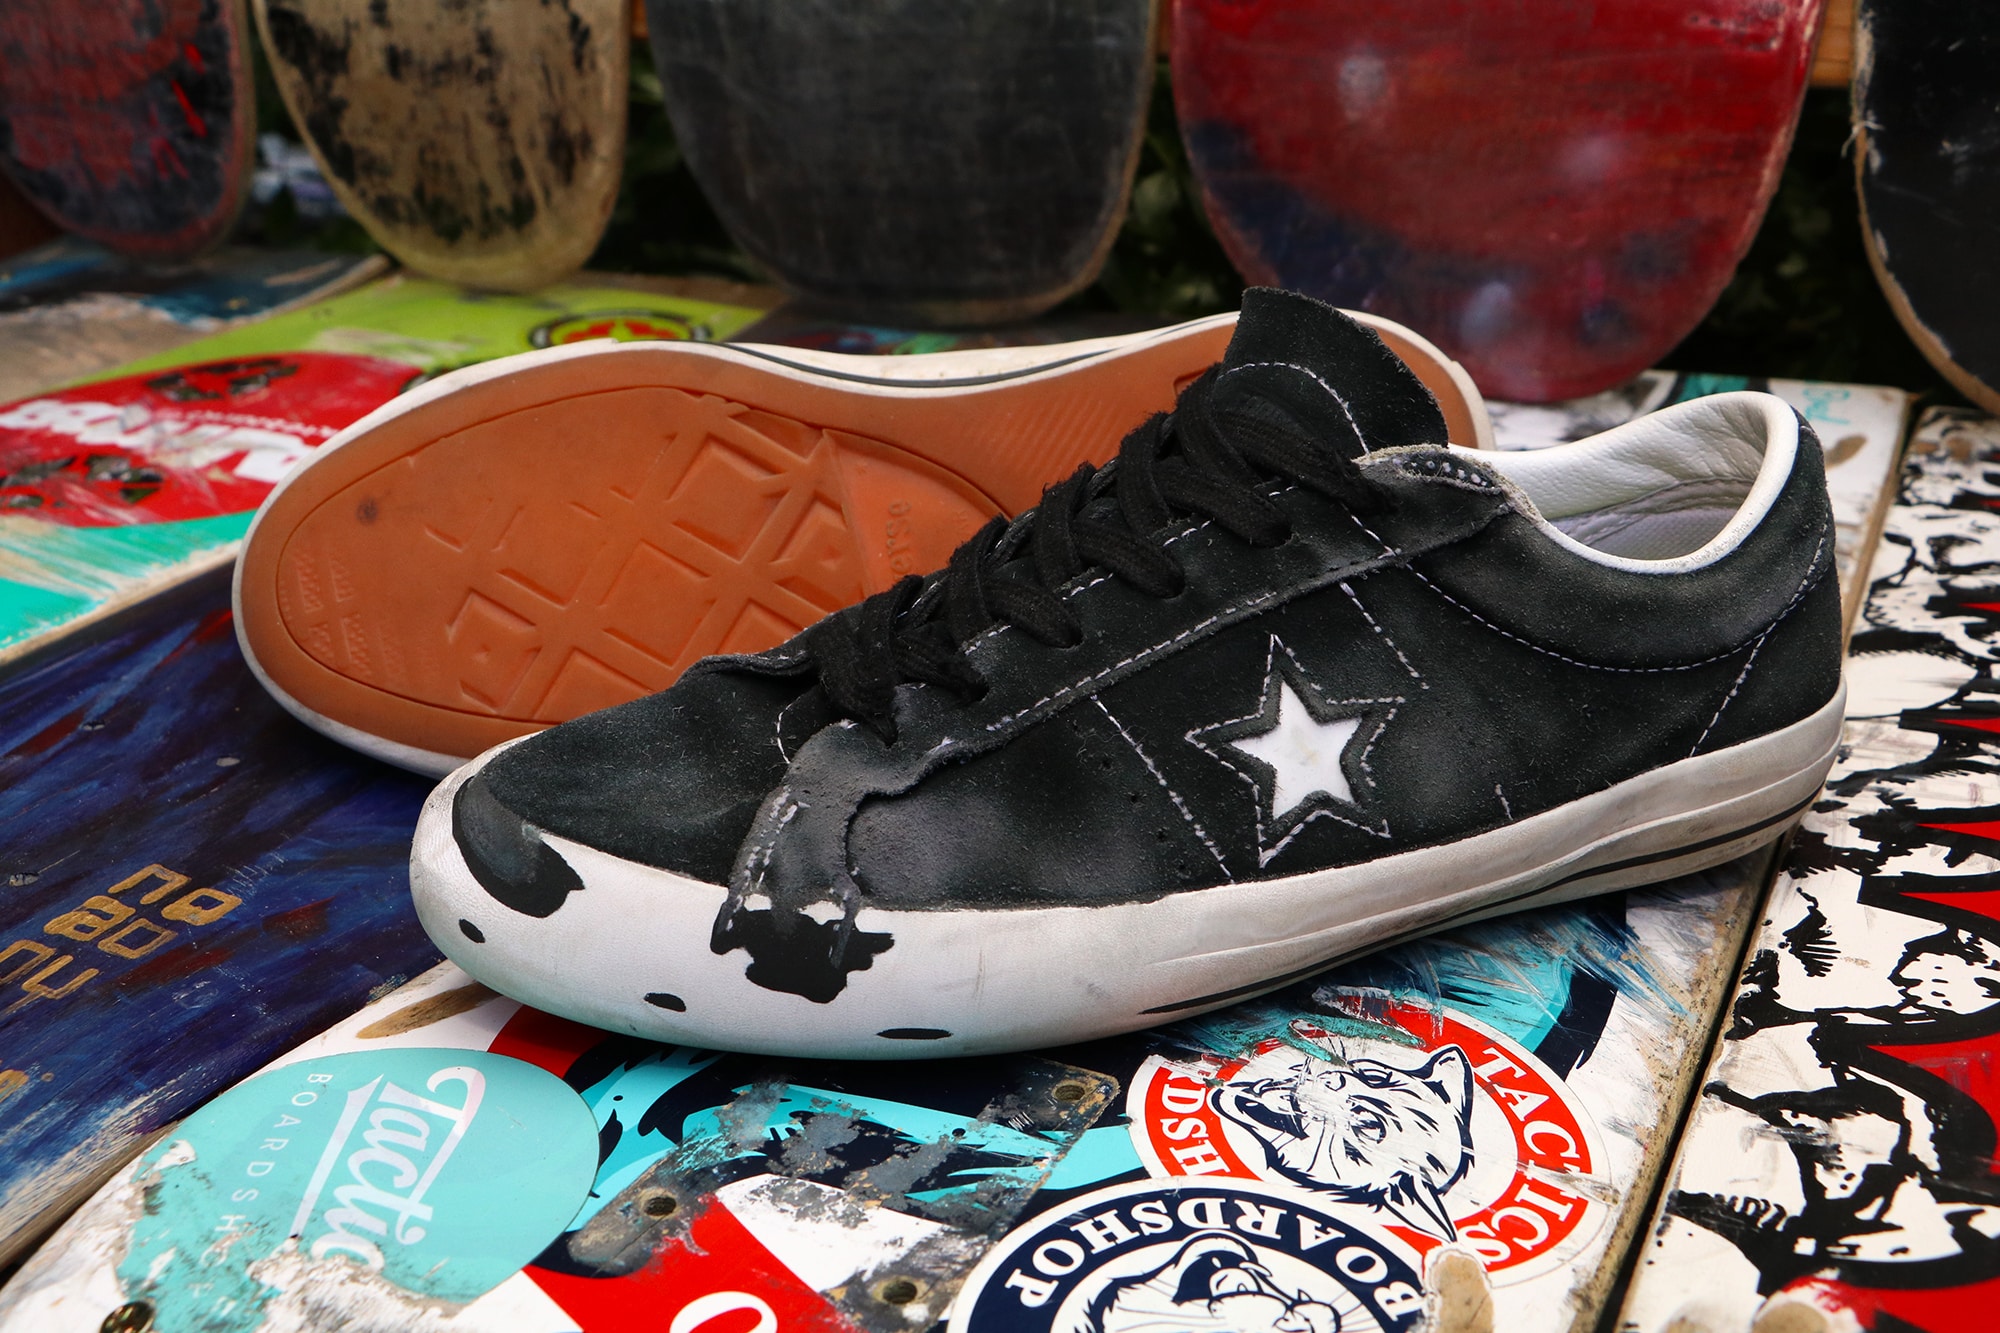 Converse One Star Pro Skate Shoes Wear 